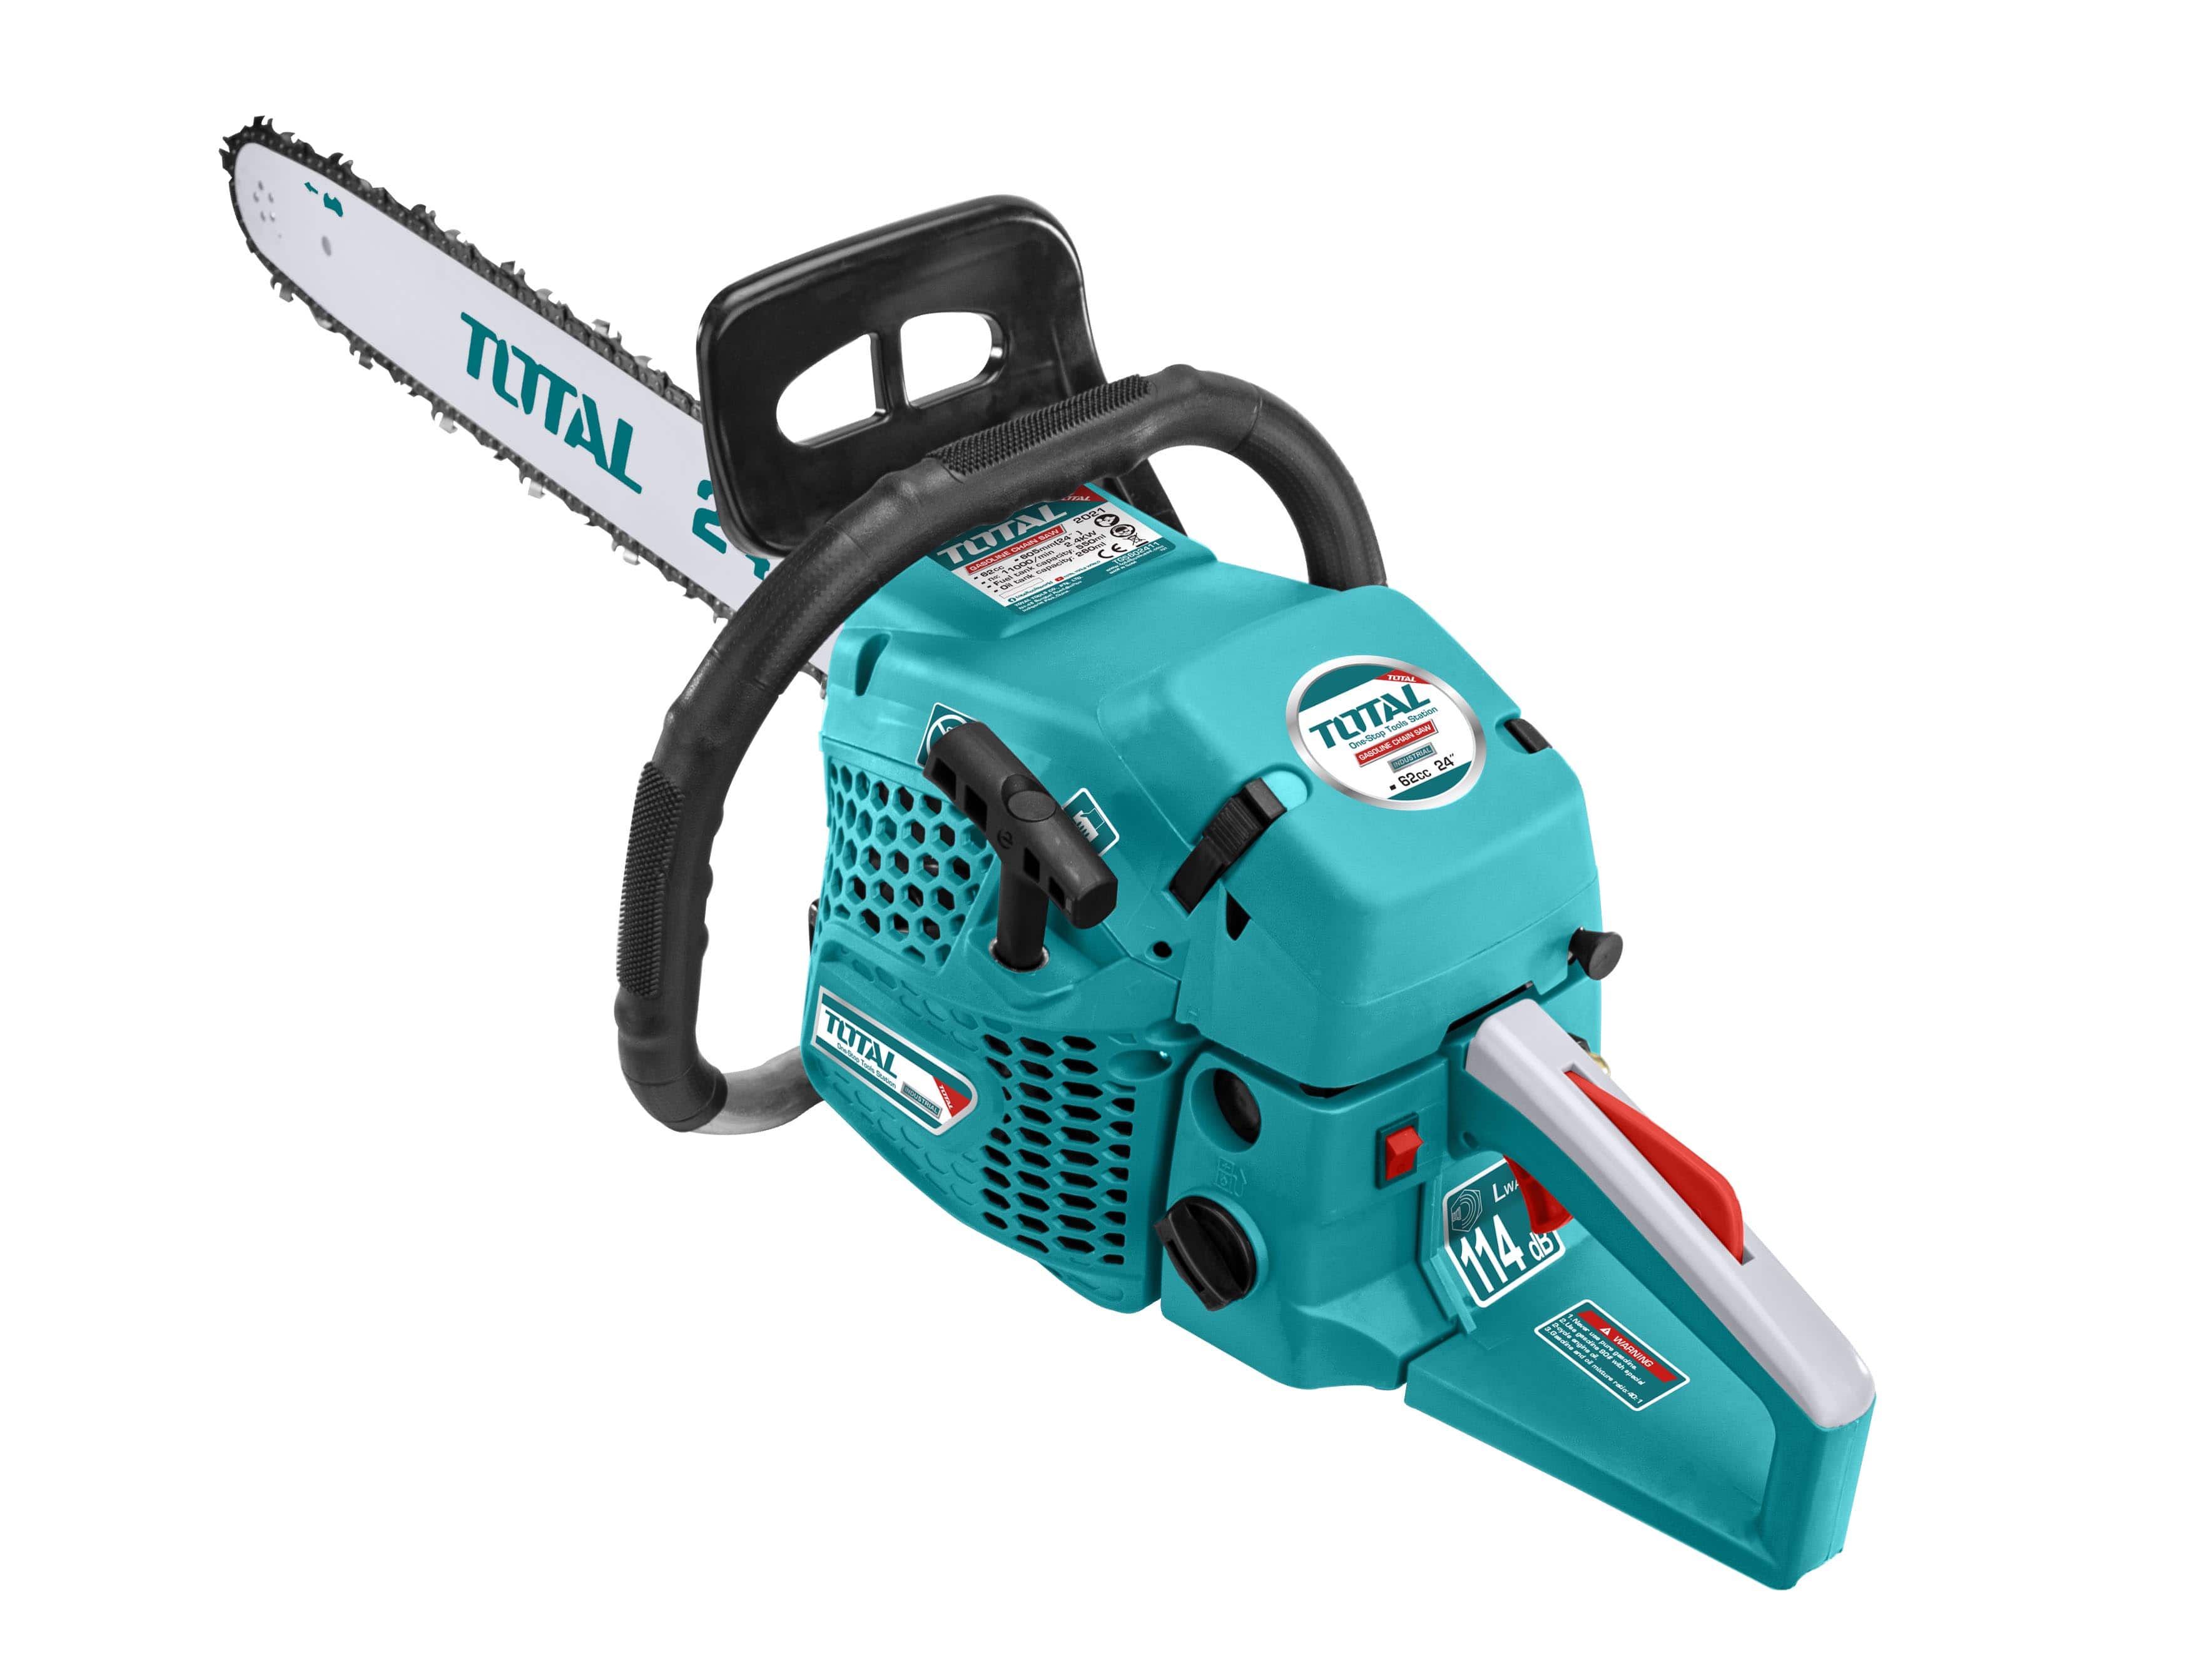 Total Gasoline Chainsaw 45.8cc - TG945185 | Supply Master | Accra, Ghana Tools Building Steel Engineering Hardware tool